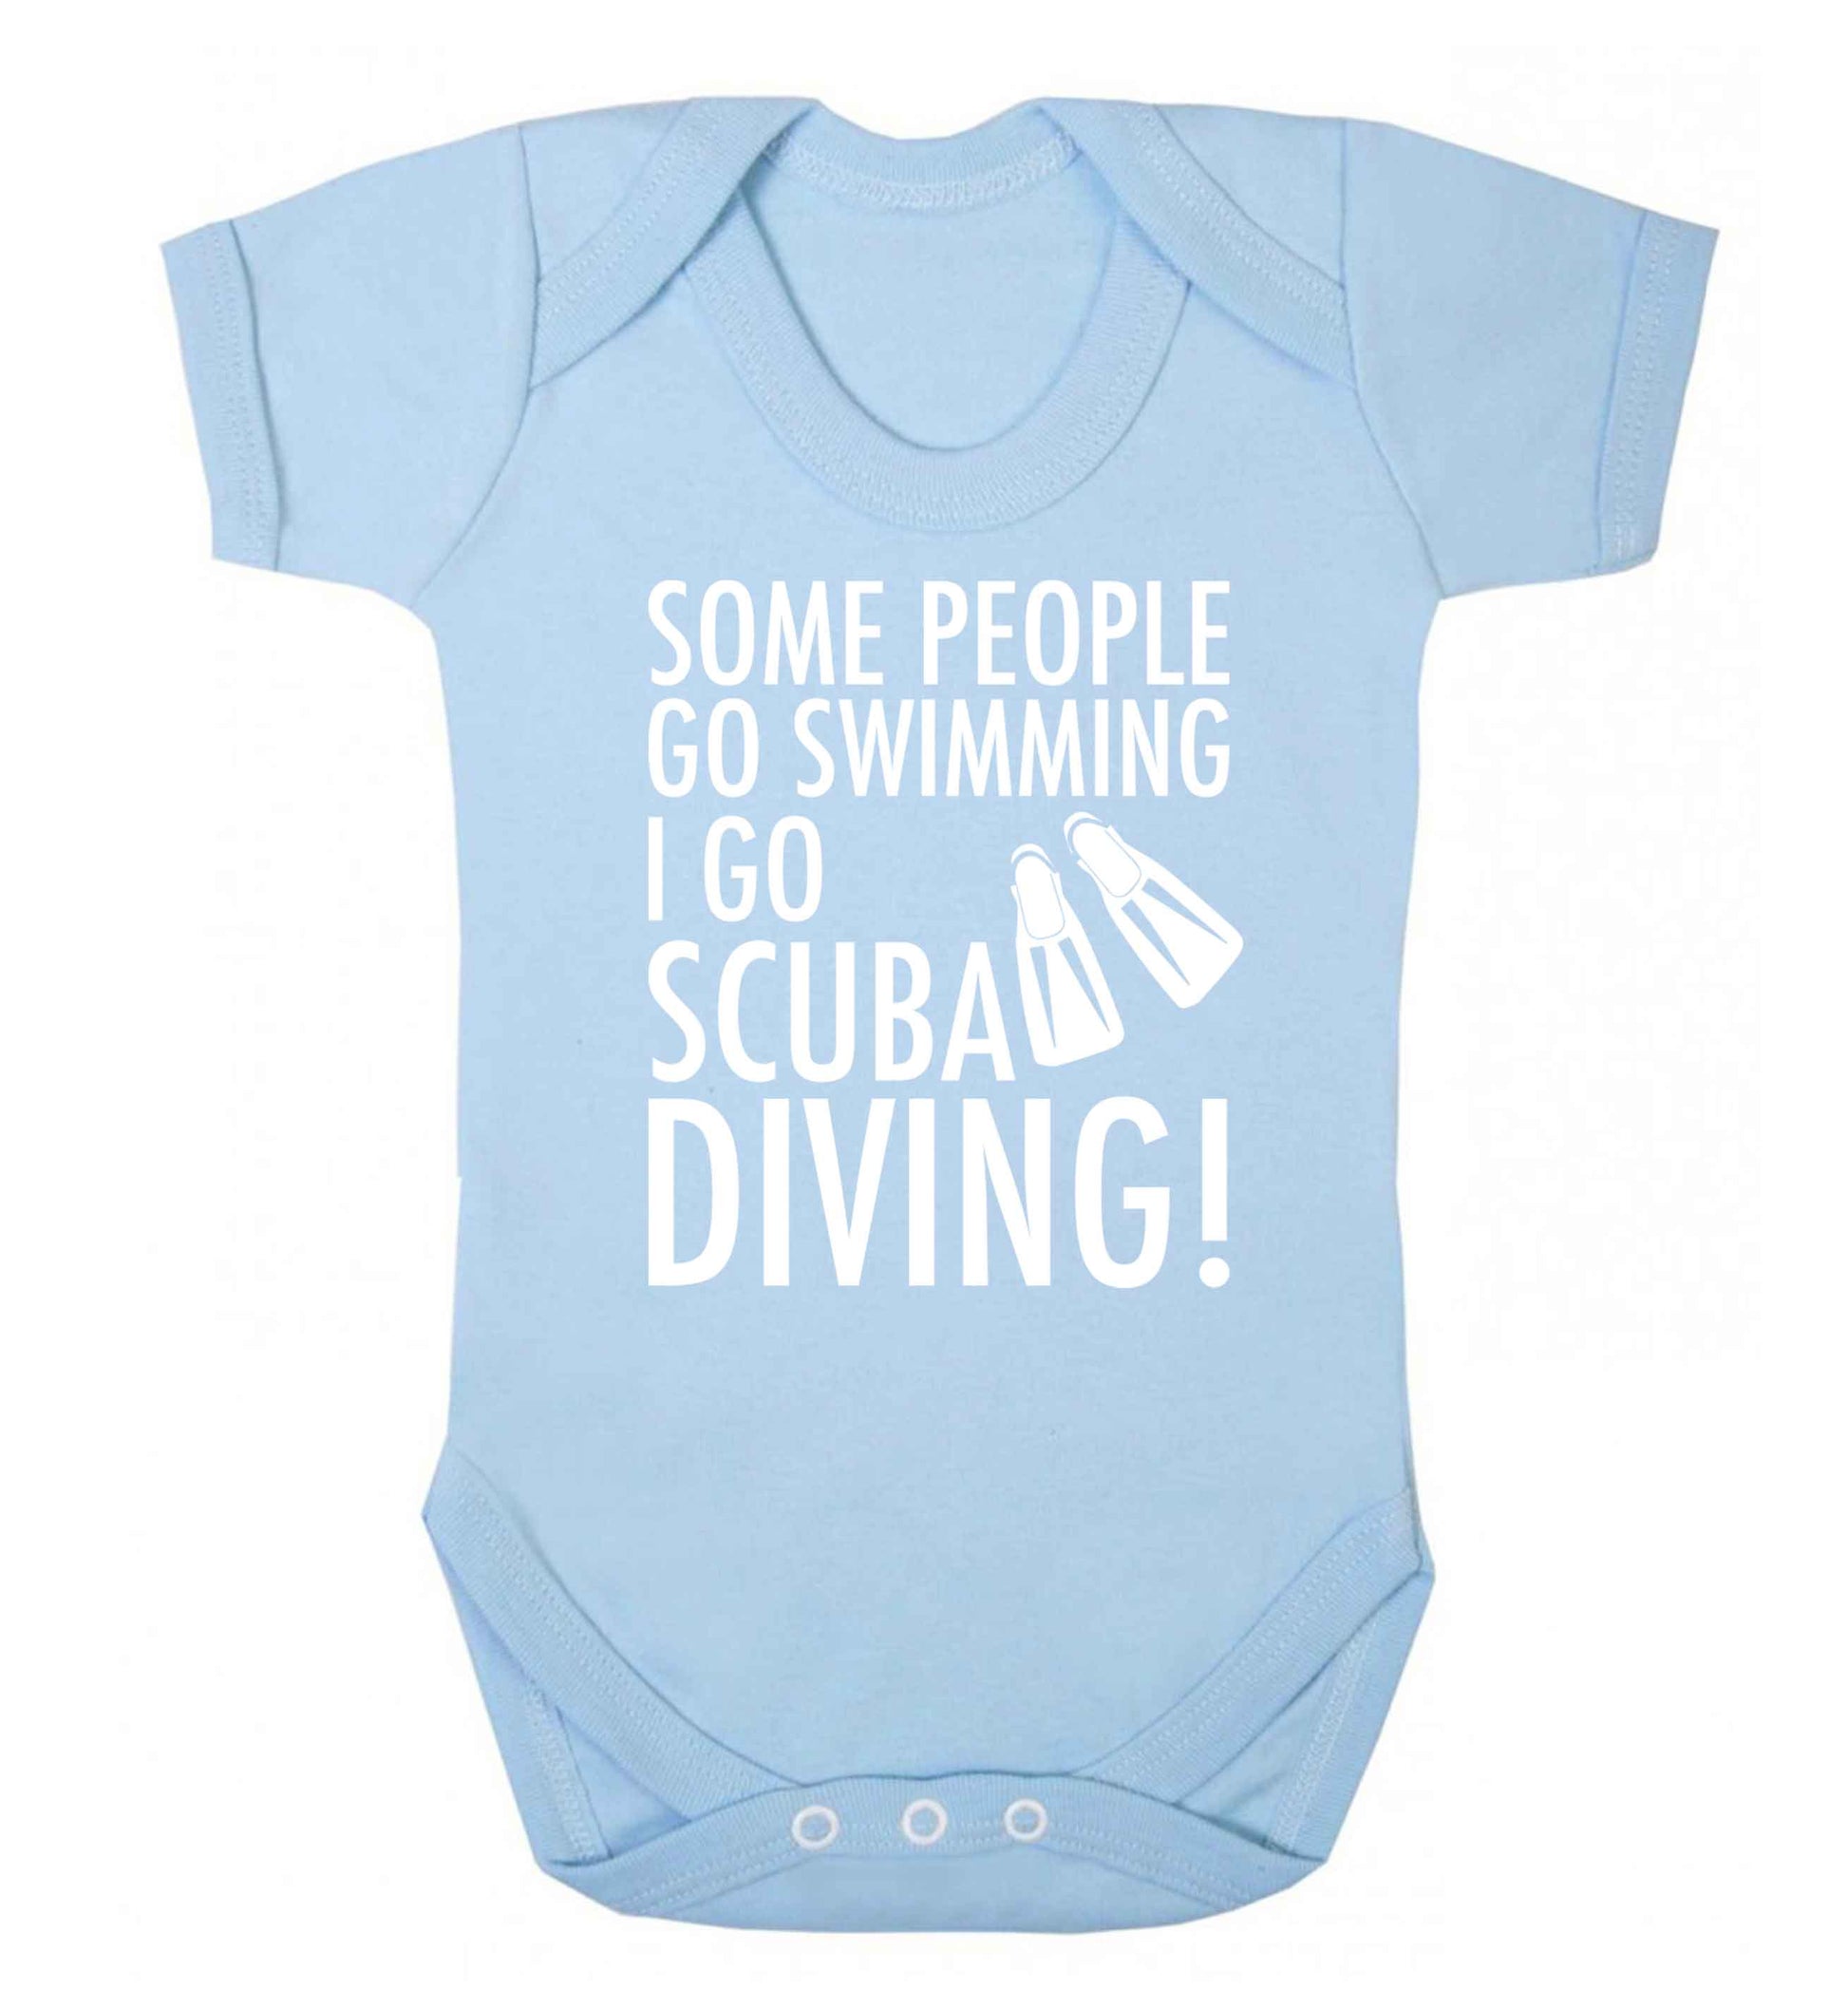 Some people go swimming I go scuba diving! Baby Vest pale blue 18-24 months